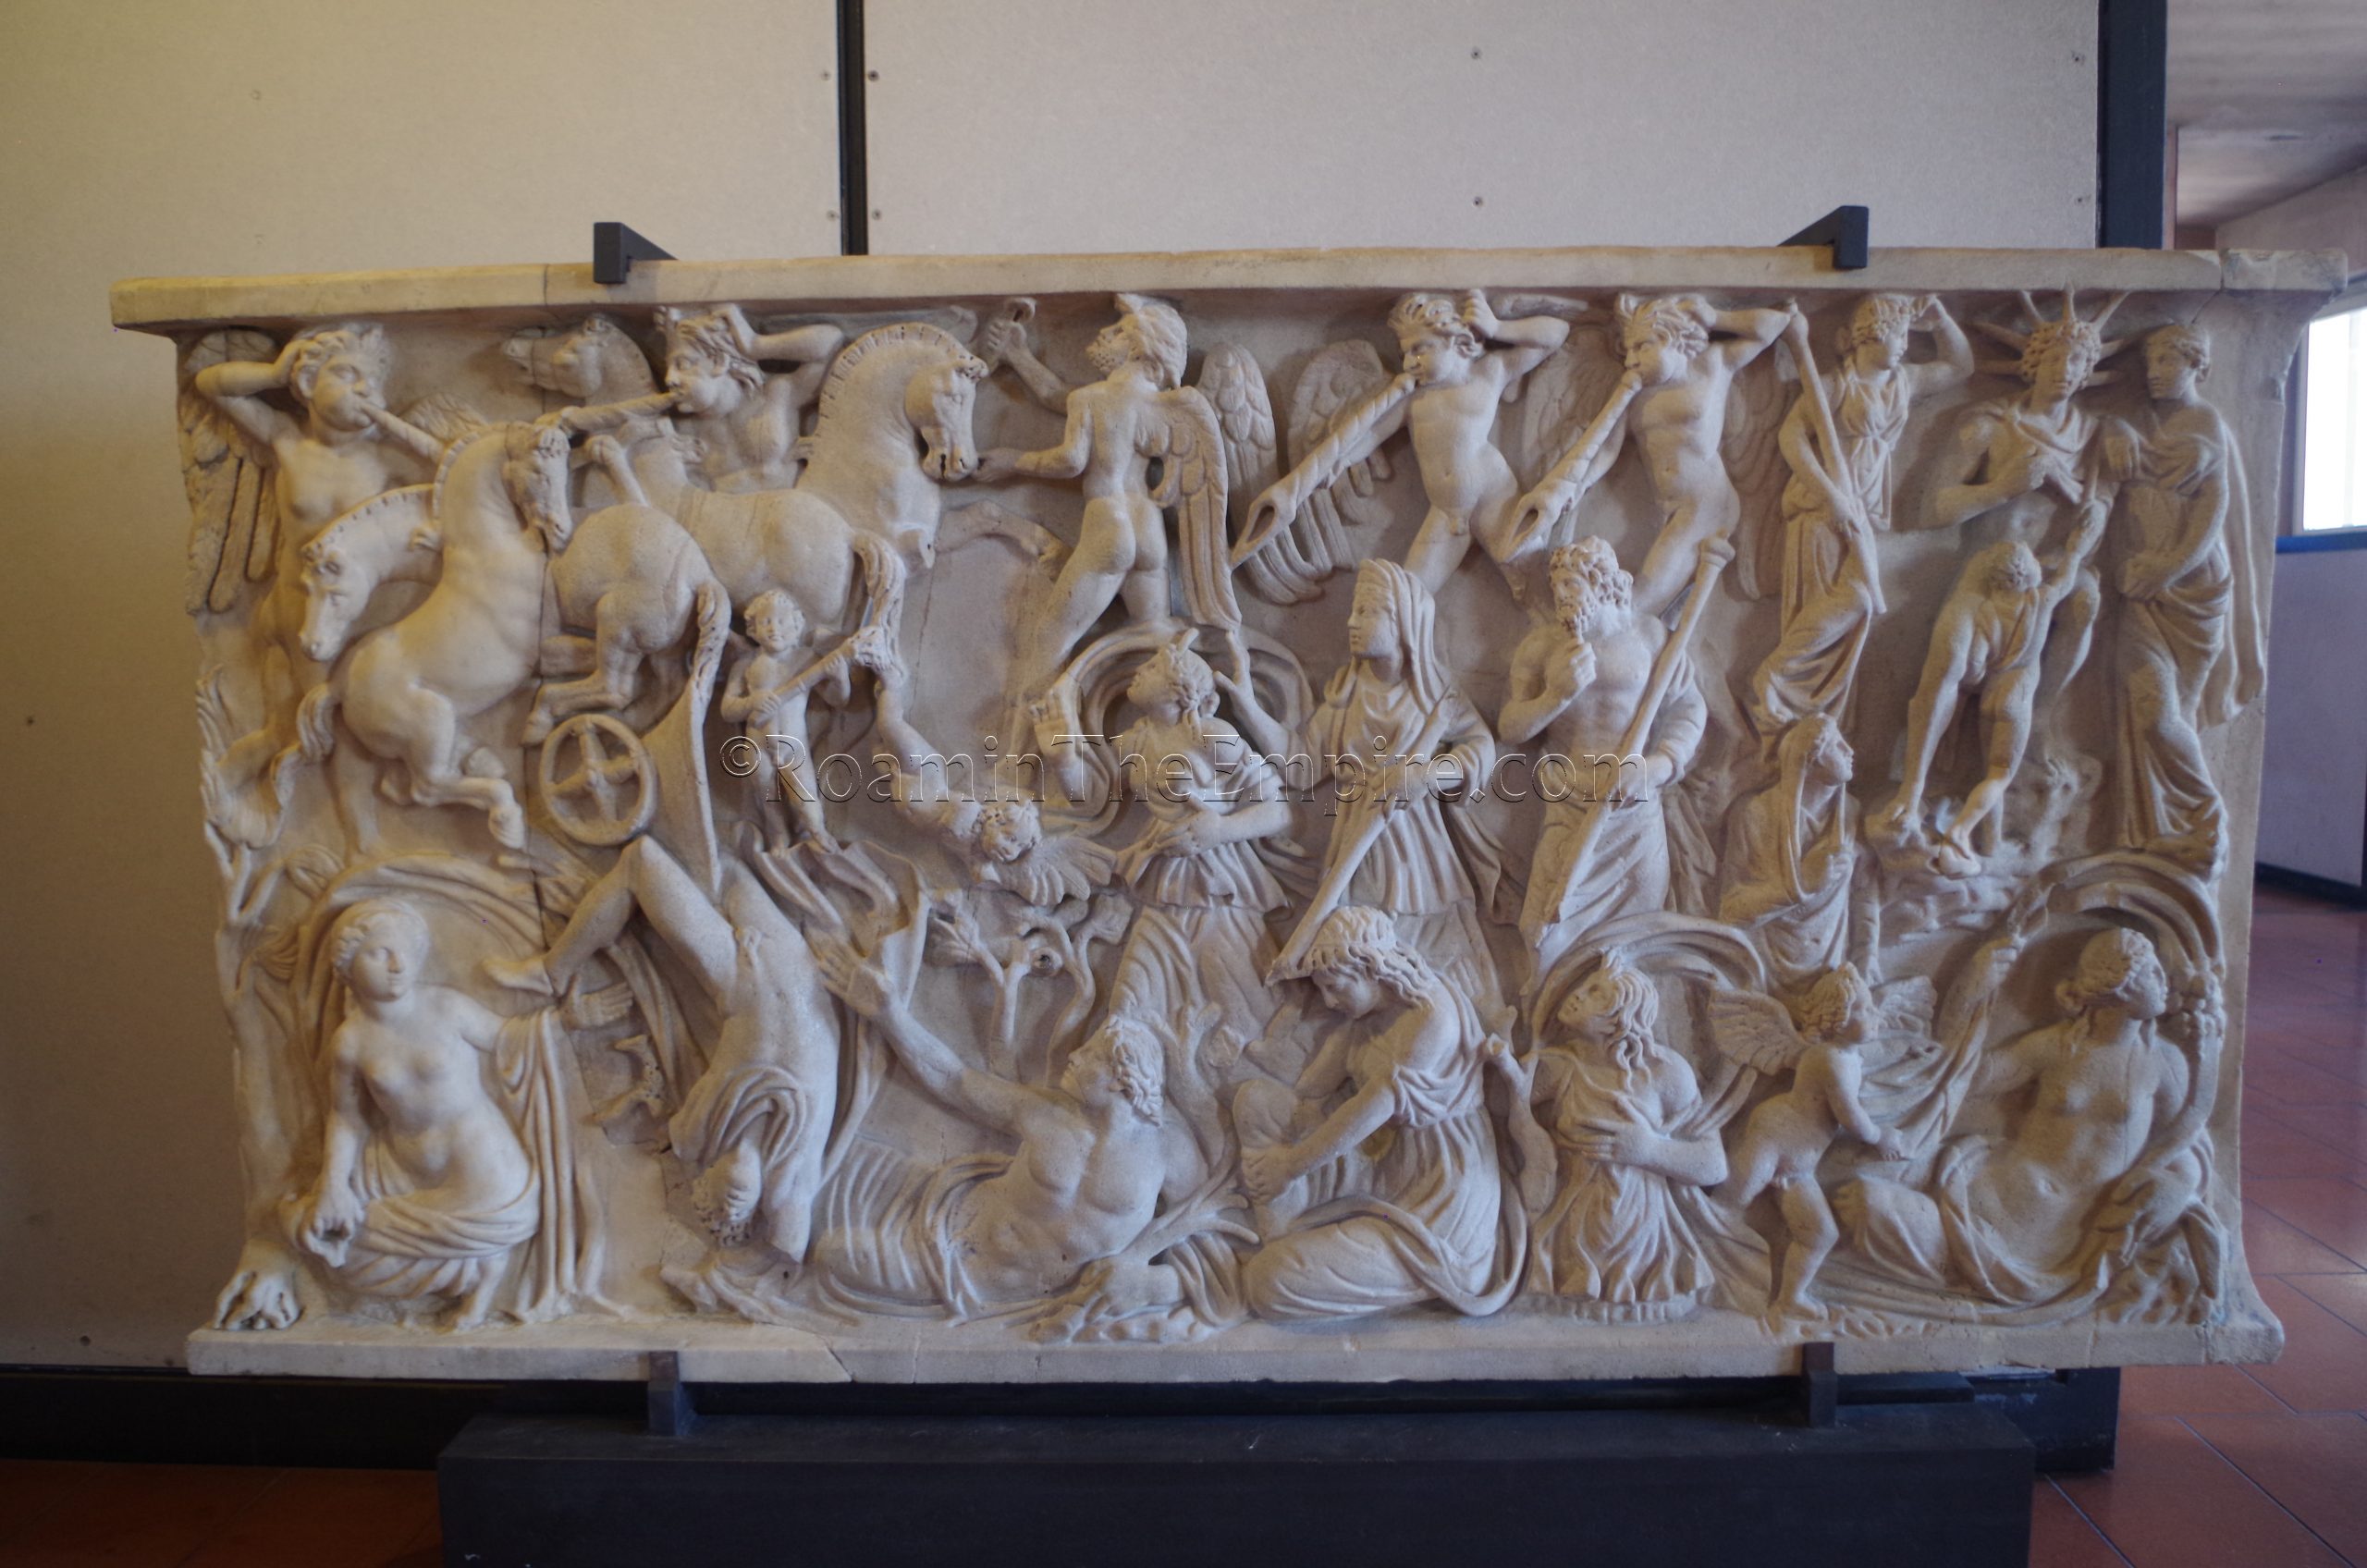 Sarcophagus depicting the myth of Phaethon in the Museo Lapidario Maffeiano. Dated to the 3rd century CE, from Rome.